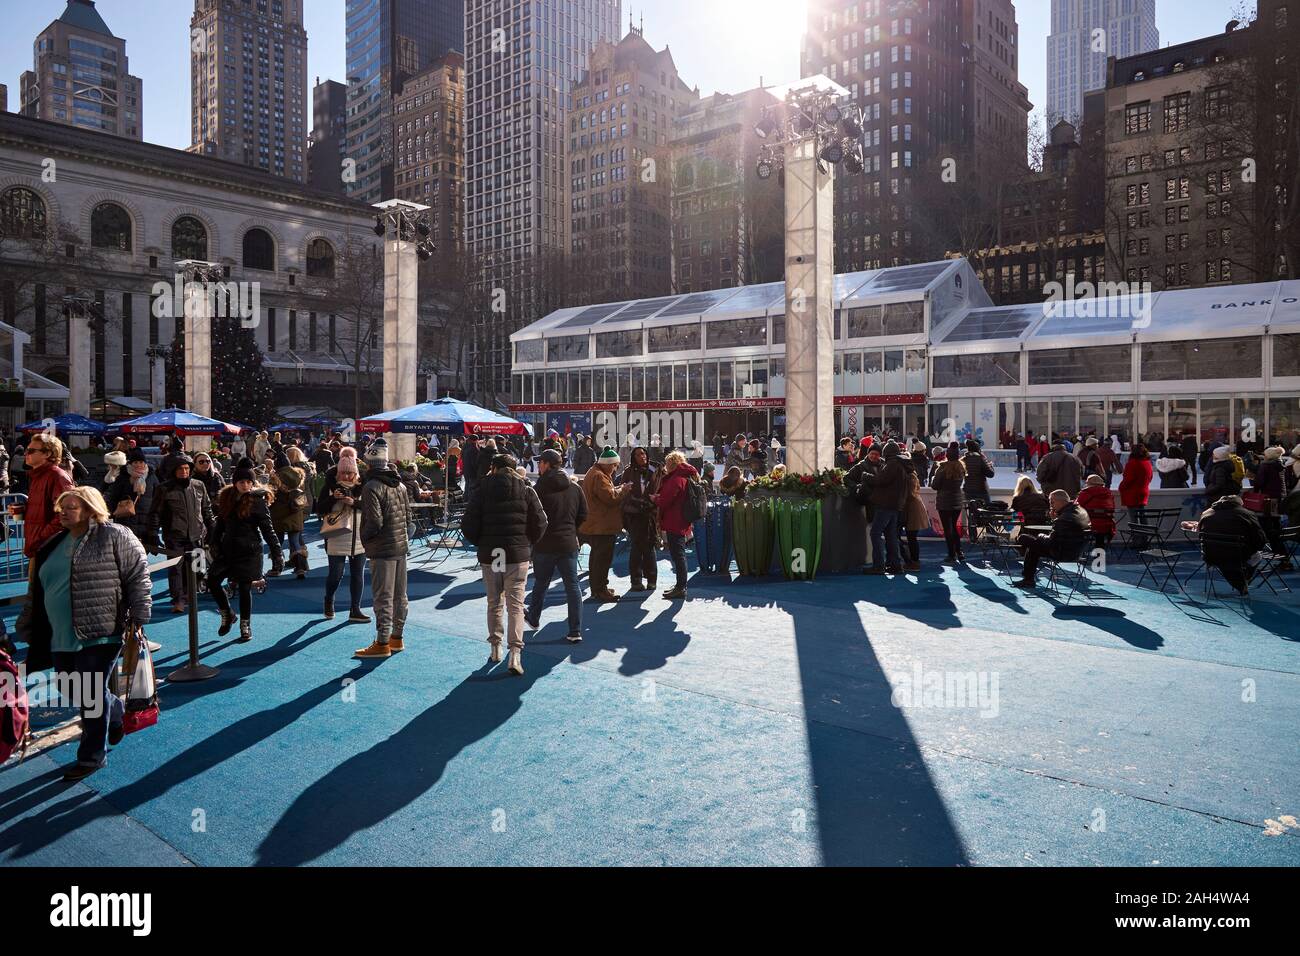 Ice skating, Shopping and Eating at Bryant Park, New York City, 20 Dec 2019 Stock Photo